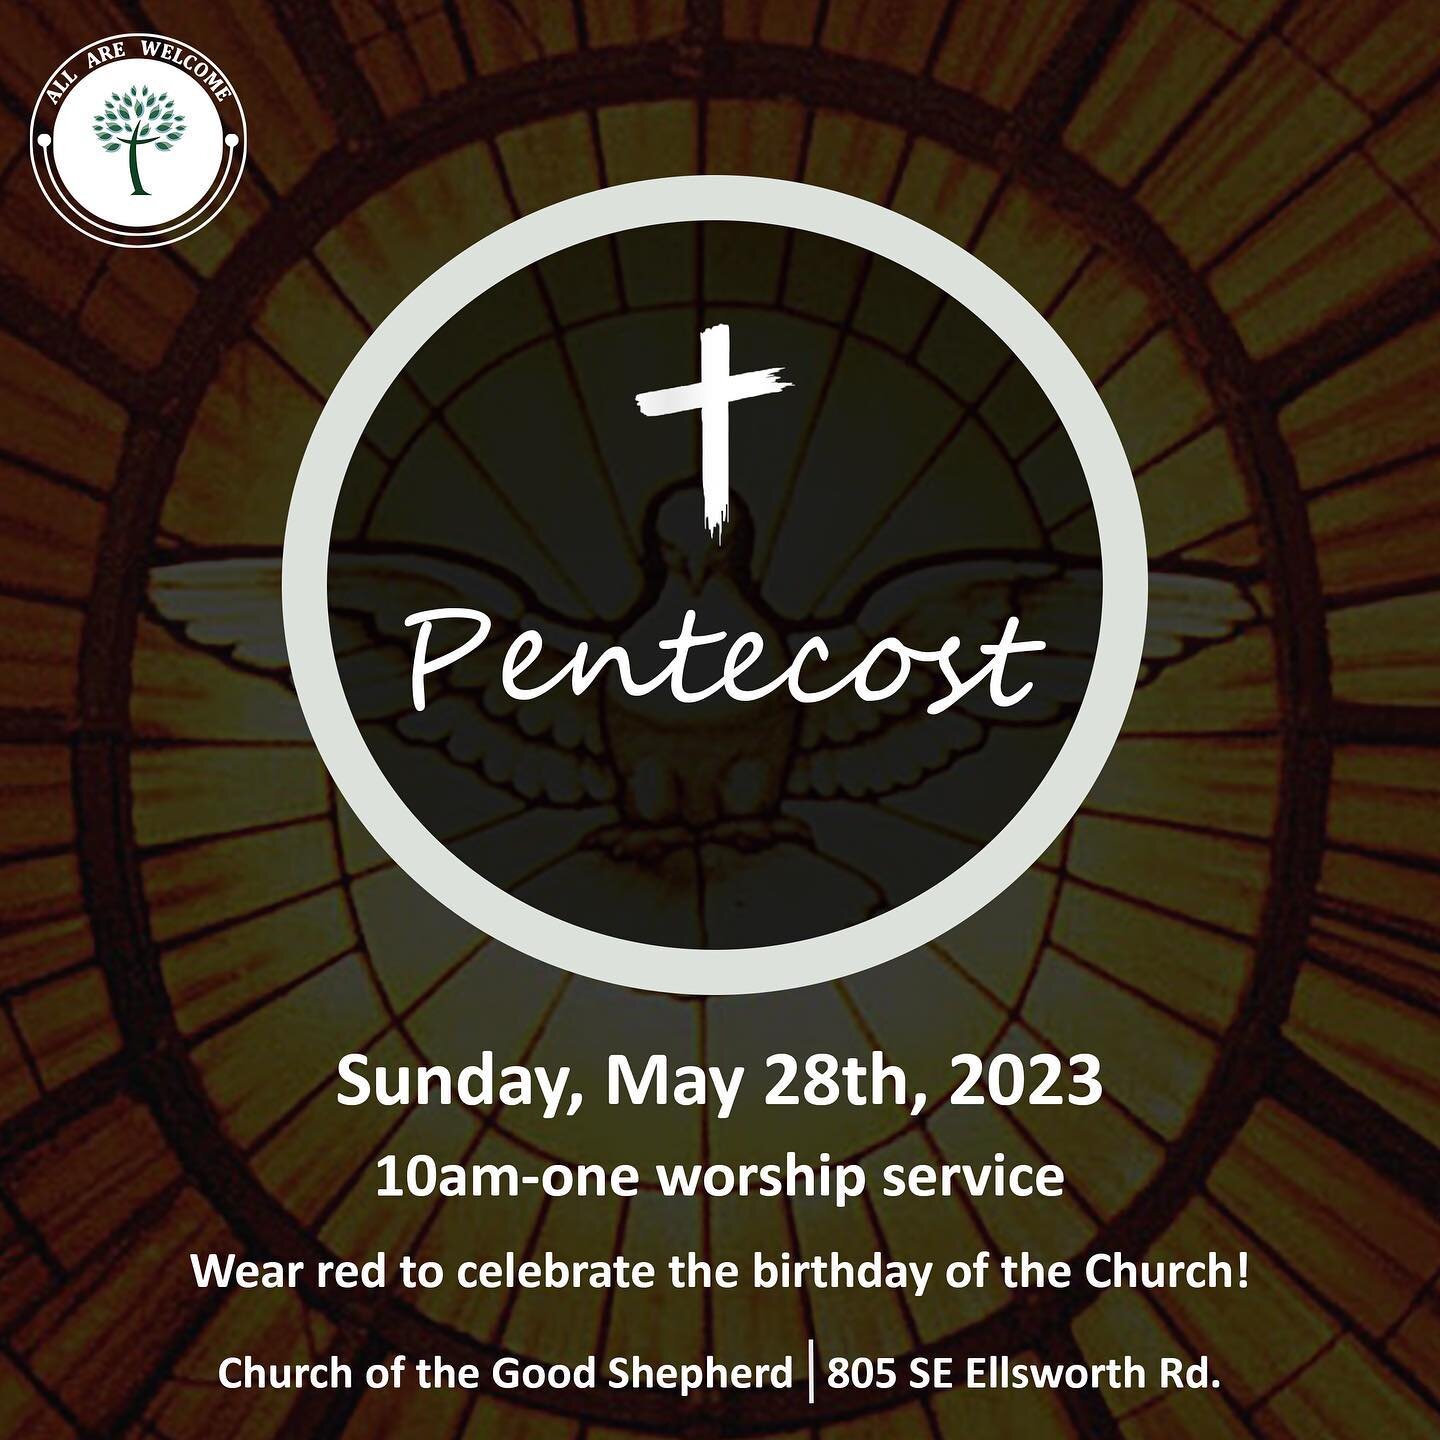 We made a mistake and forgot to change the date on our first Pentecost graphic, here is the updated information. Thank you for understanding! 

*Church of the Good Shepherd will not tolerate any disrespectful, discriminatory, or hateful comments. Any